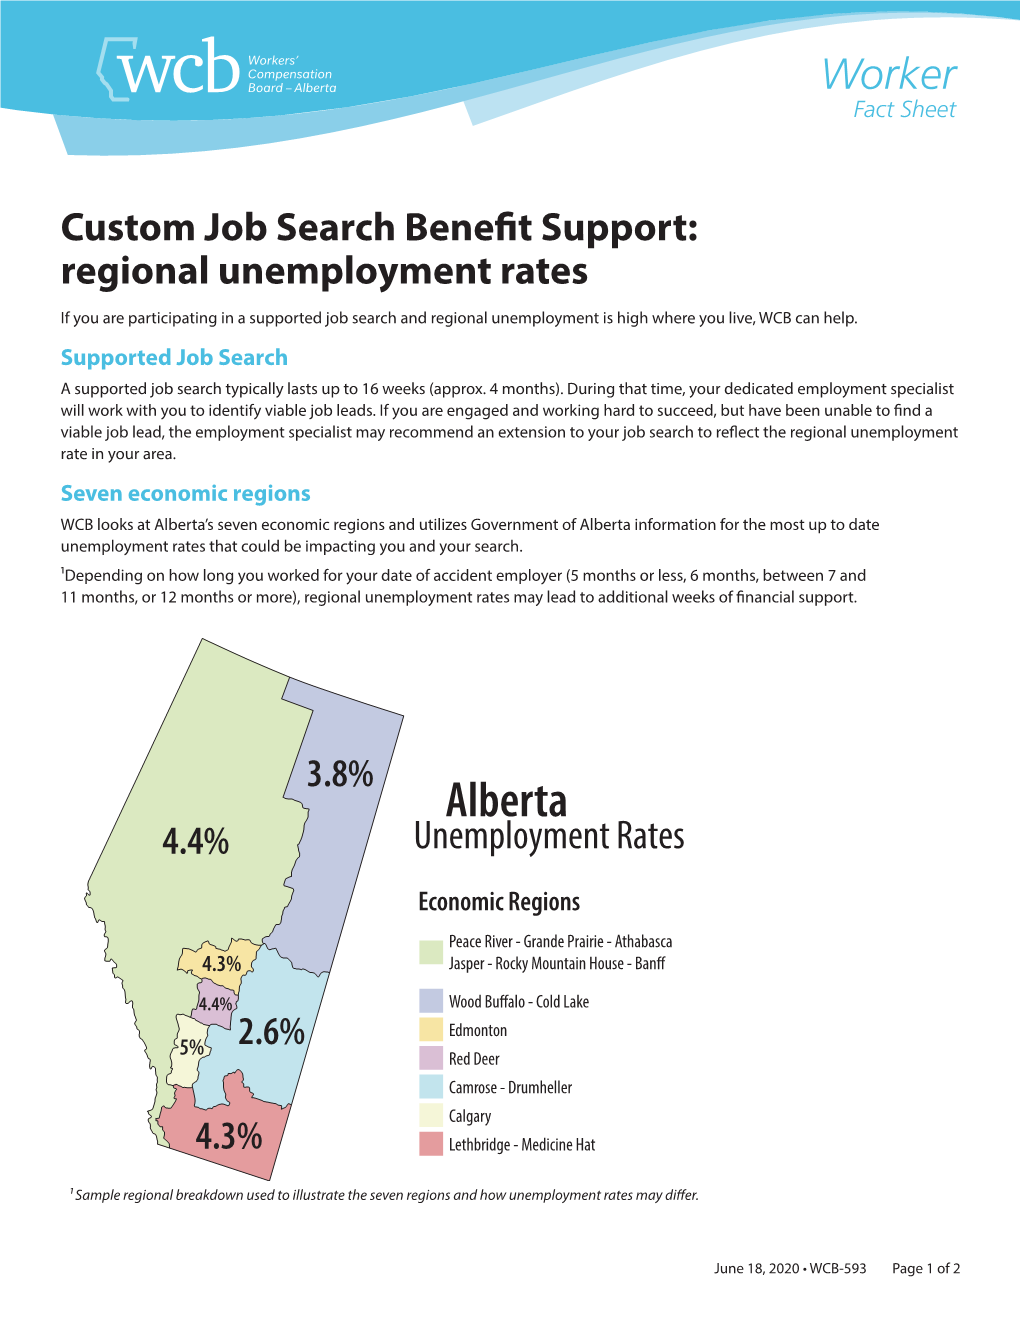 Supported Job Search Benefits – Regional Unemployment Rate